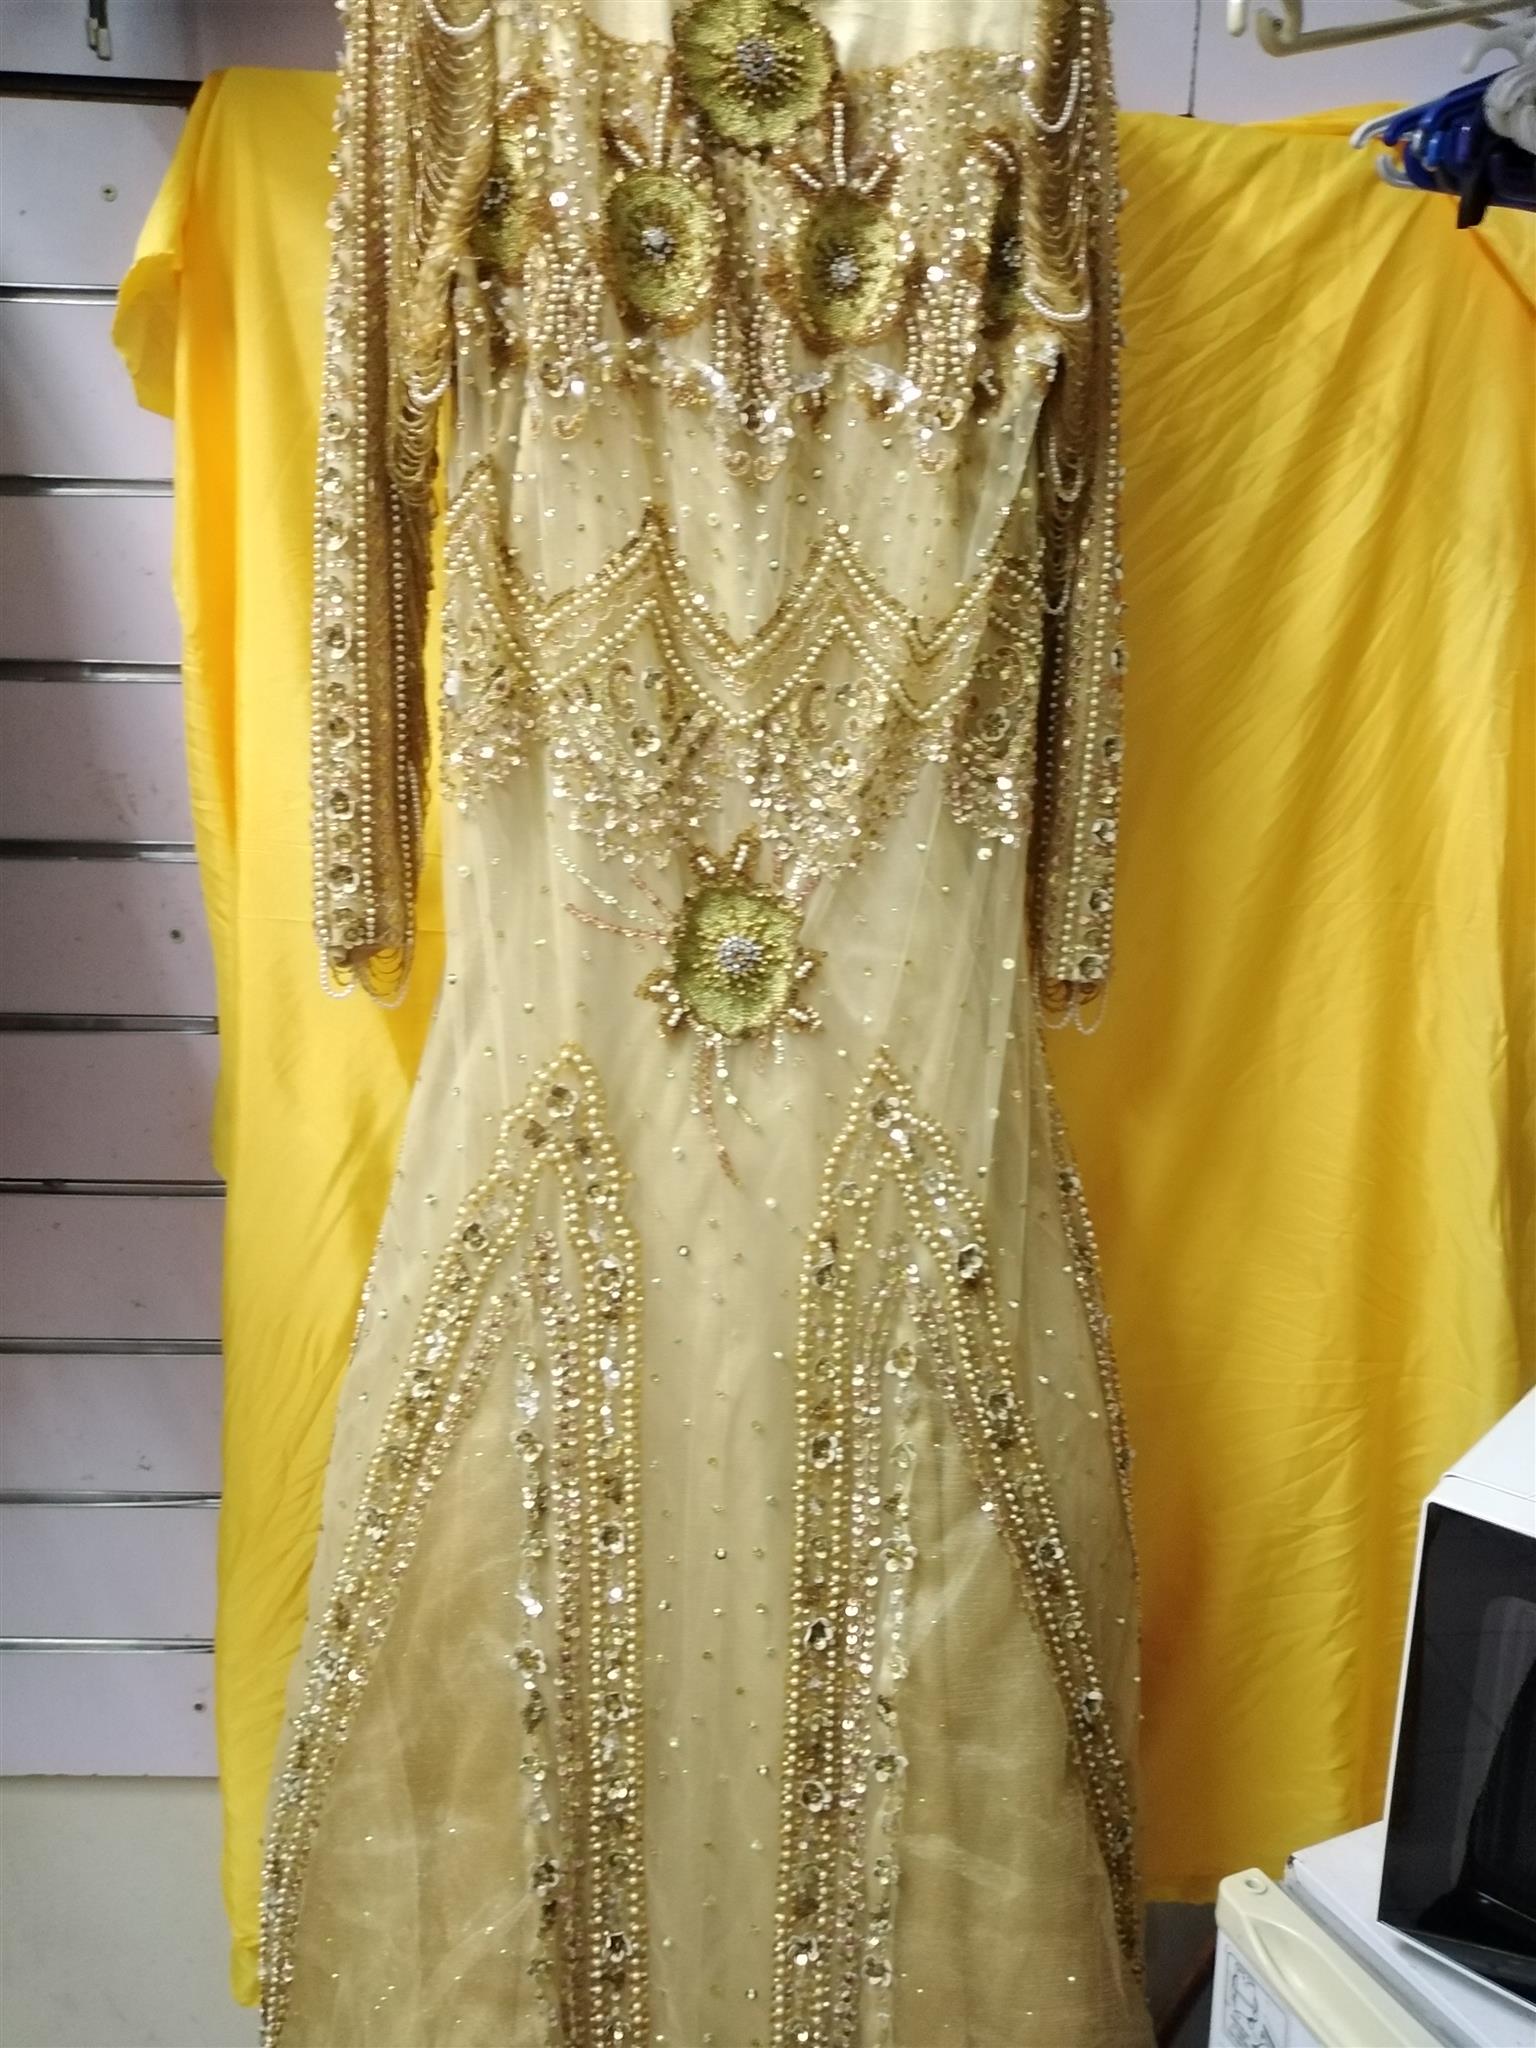 GOLD BEADED WEDDING GOWN 